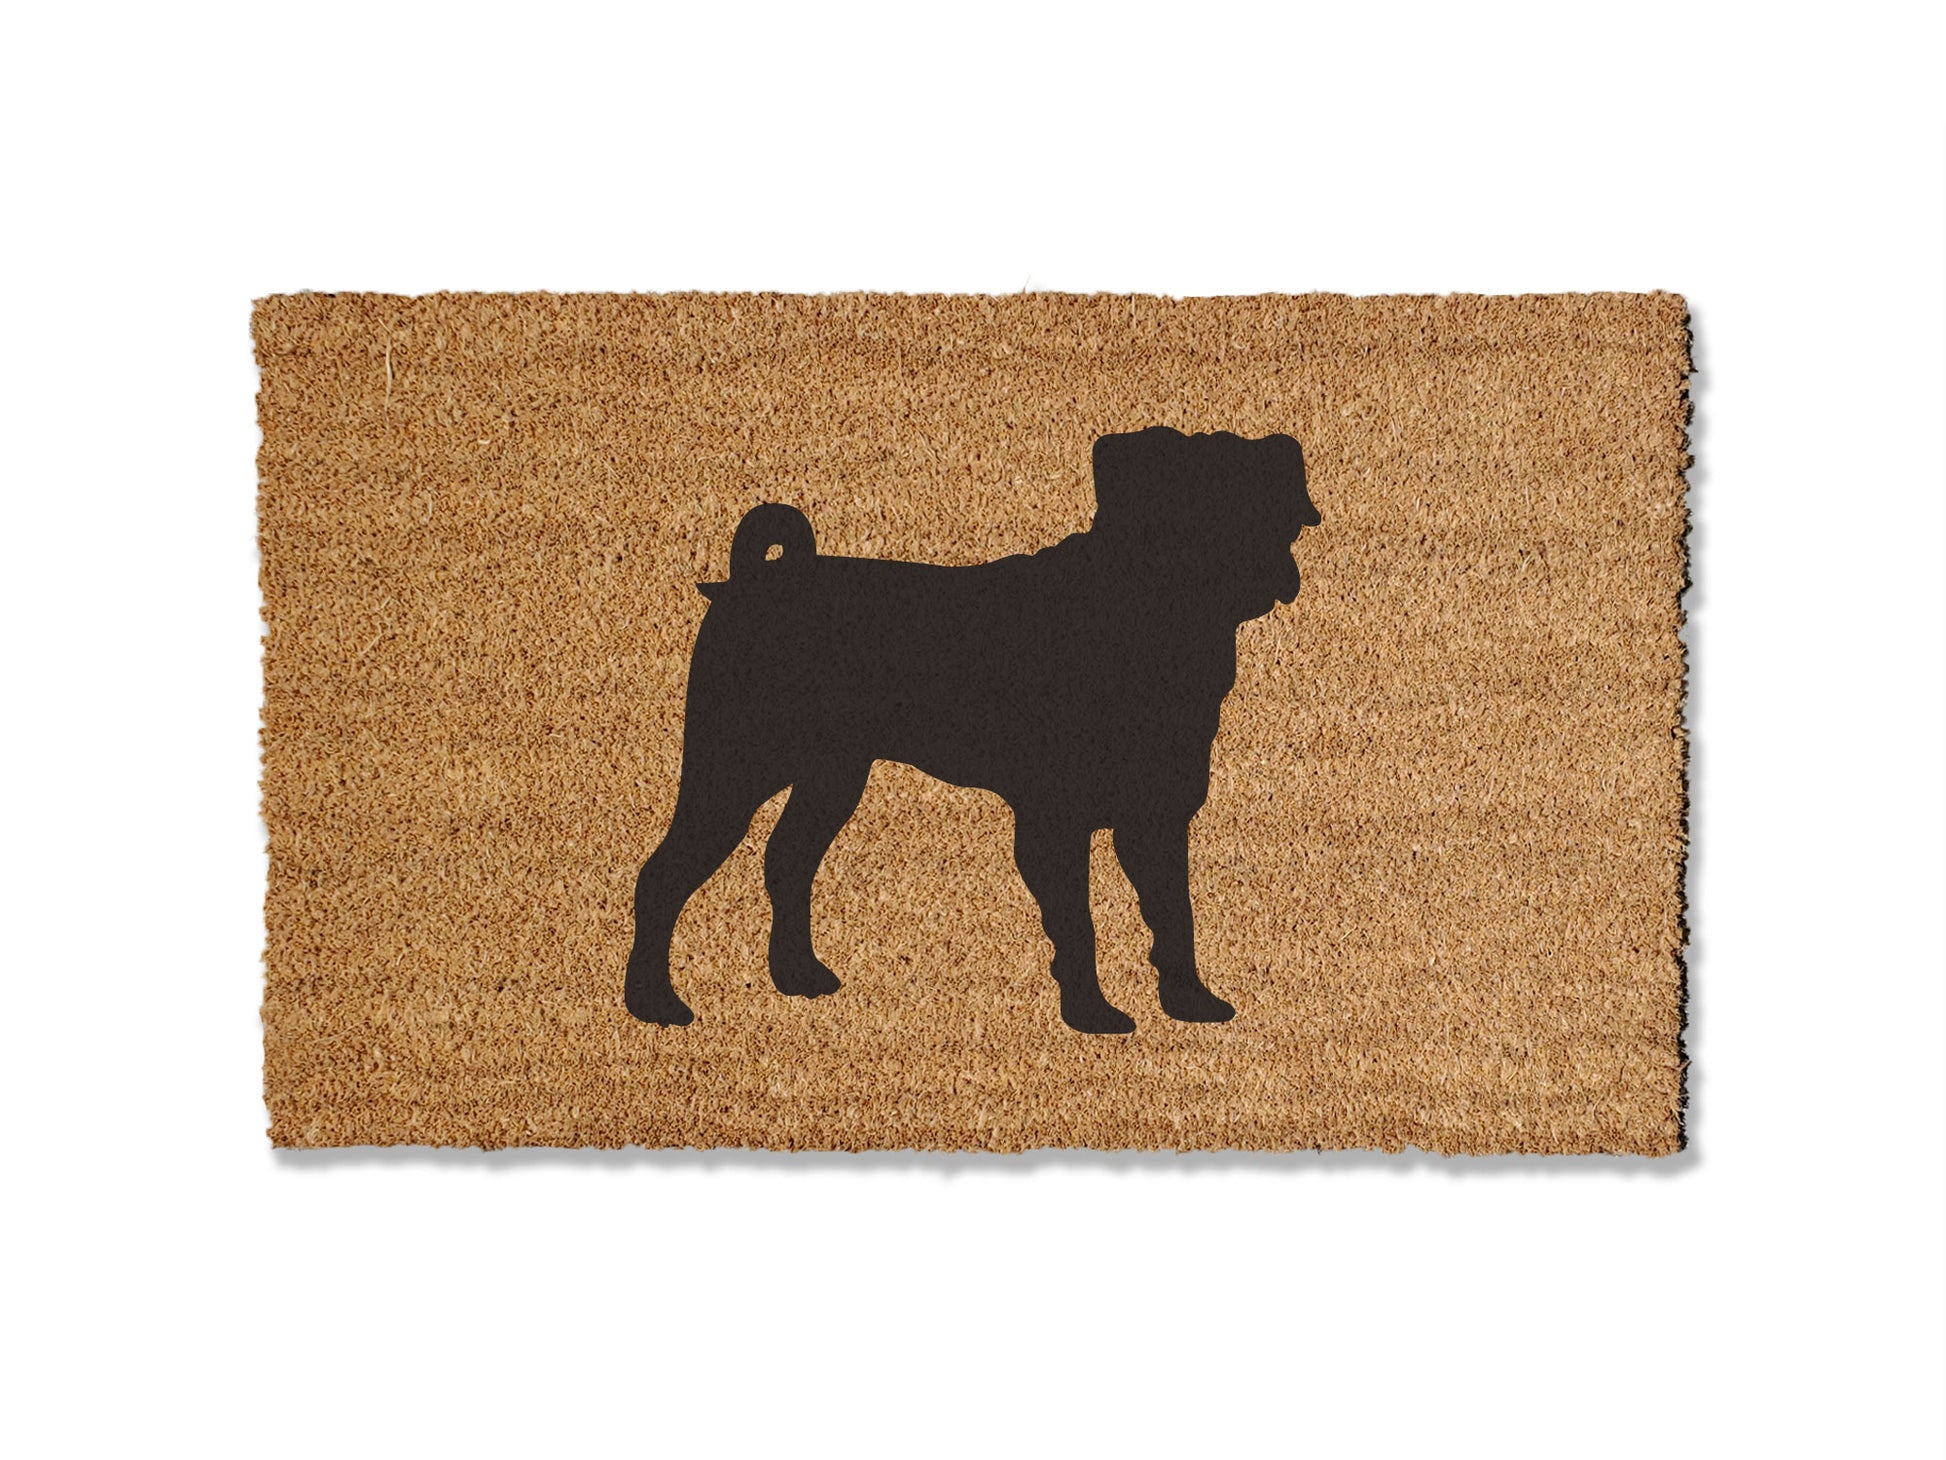 Coir doormat featuring an adorable Pug design, ideal for dog lovers. This doormat is not only charming but also effective at trapping dirt. Available in multiple sizes to suit your entryway needs.